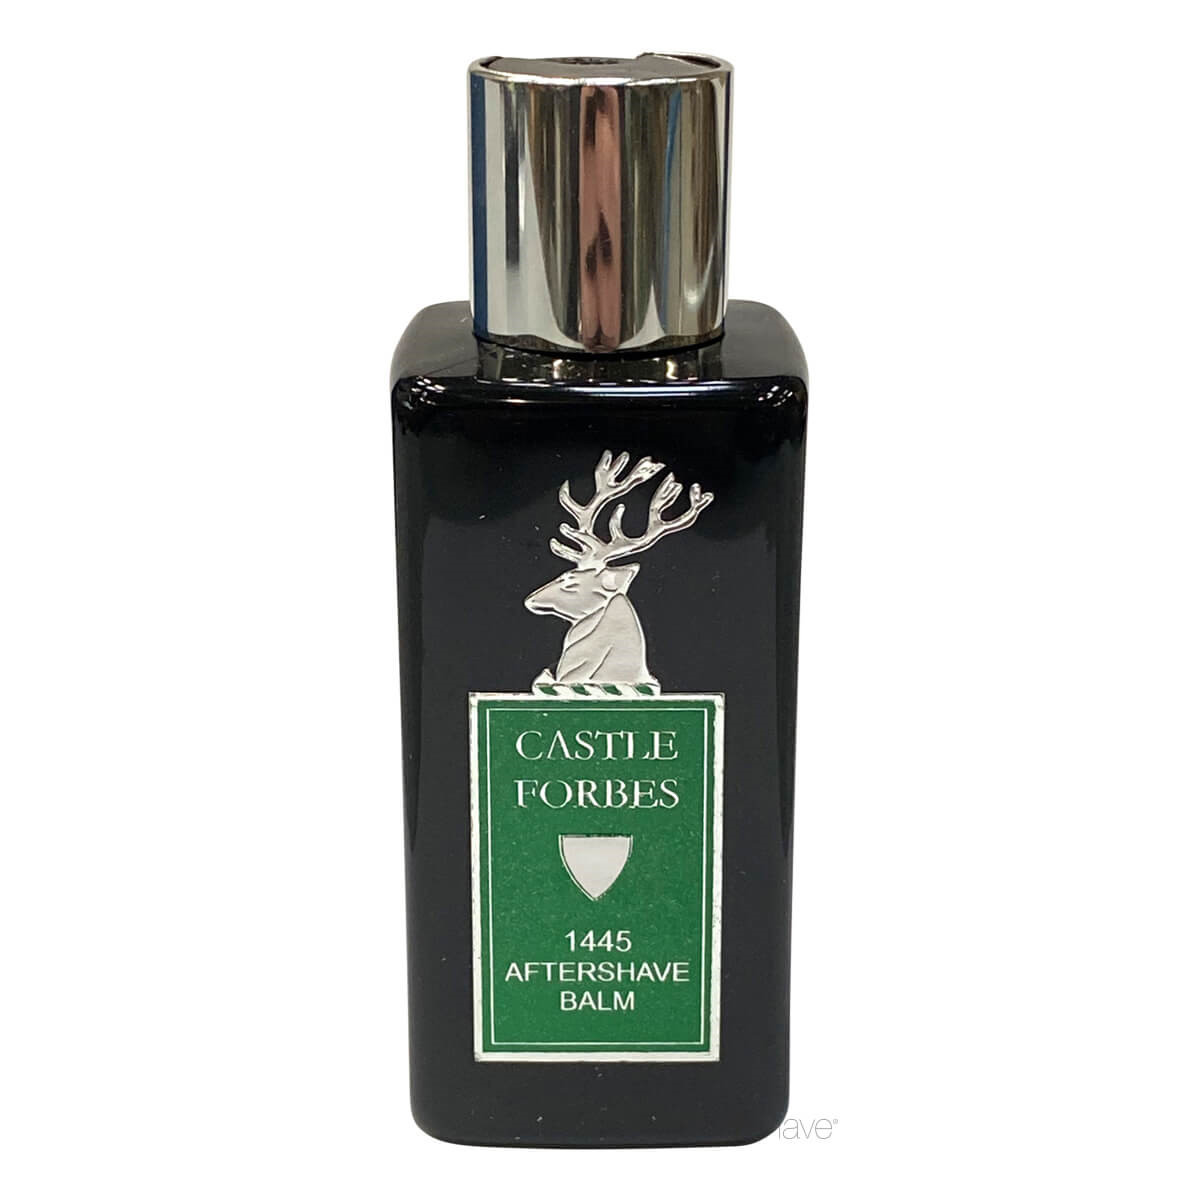 Castle Forbes Aftershave Balm, 1445, 150 ml.